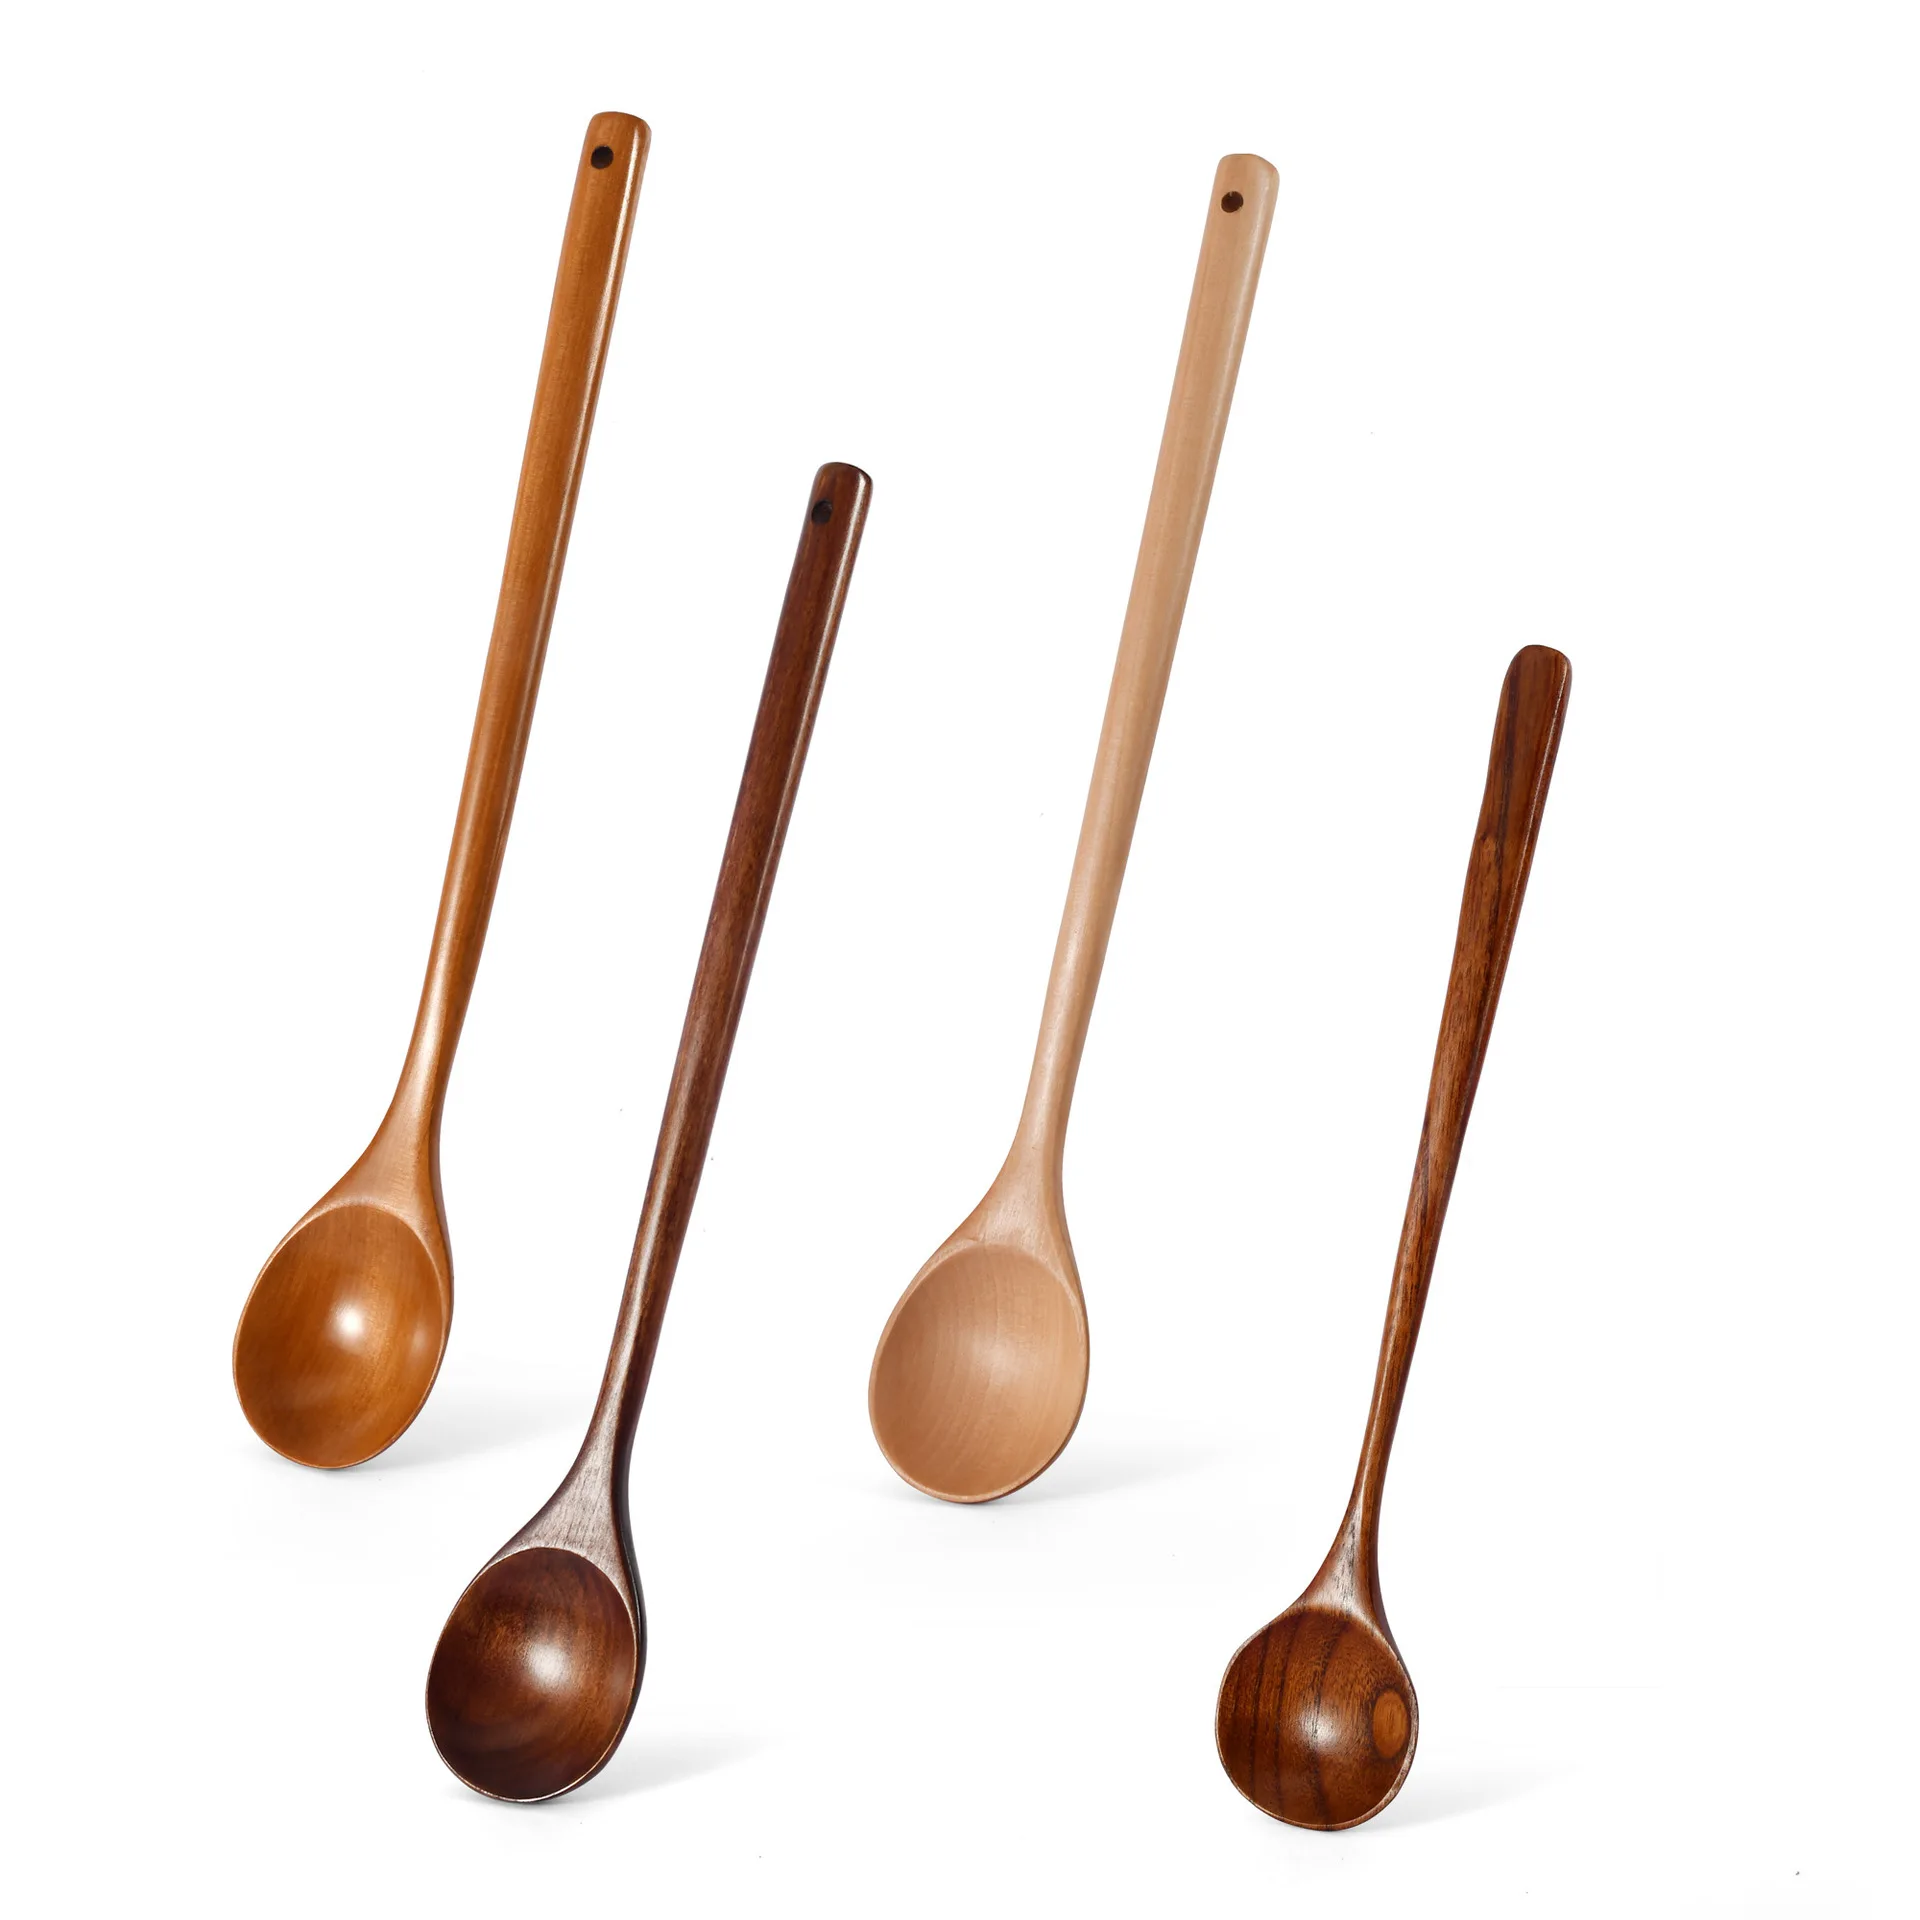 Big Promotion 1pc Wooden Spoons Long Handle Wood Soup Spoons for Eating  Mixing Stirring Cooking Tea Dessert Tableware Kitchen Supplies 